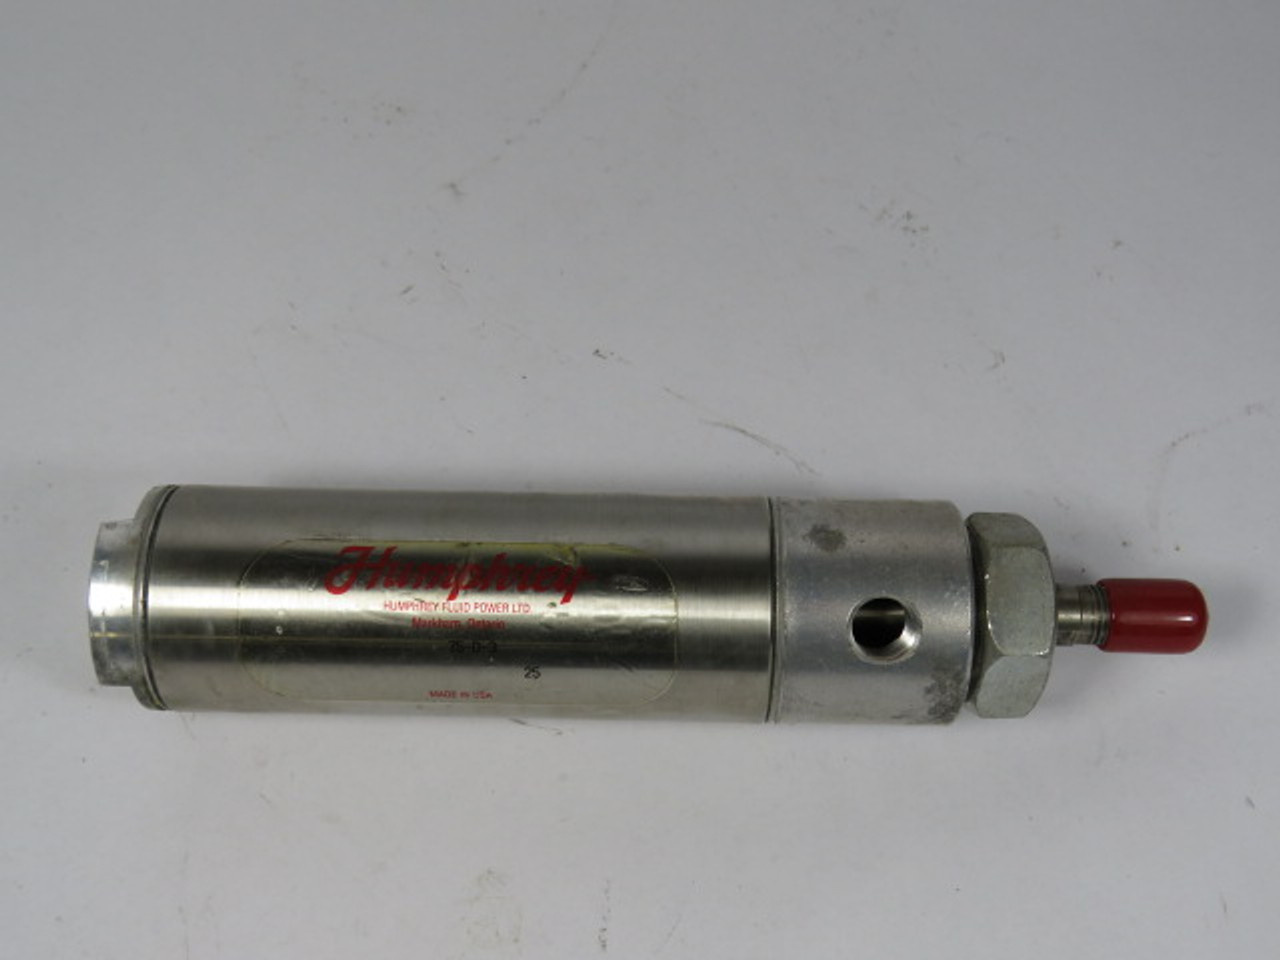 Humphrey 75-D-3 Pneumatic Cylinder 1-3/4" Bore 3" Stroke USED